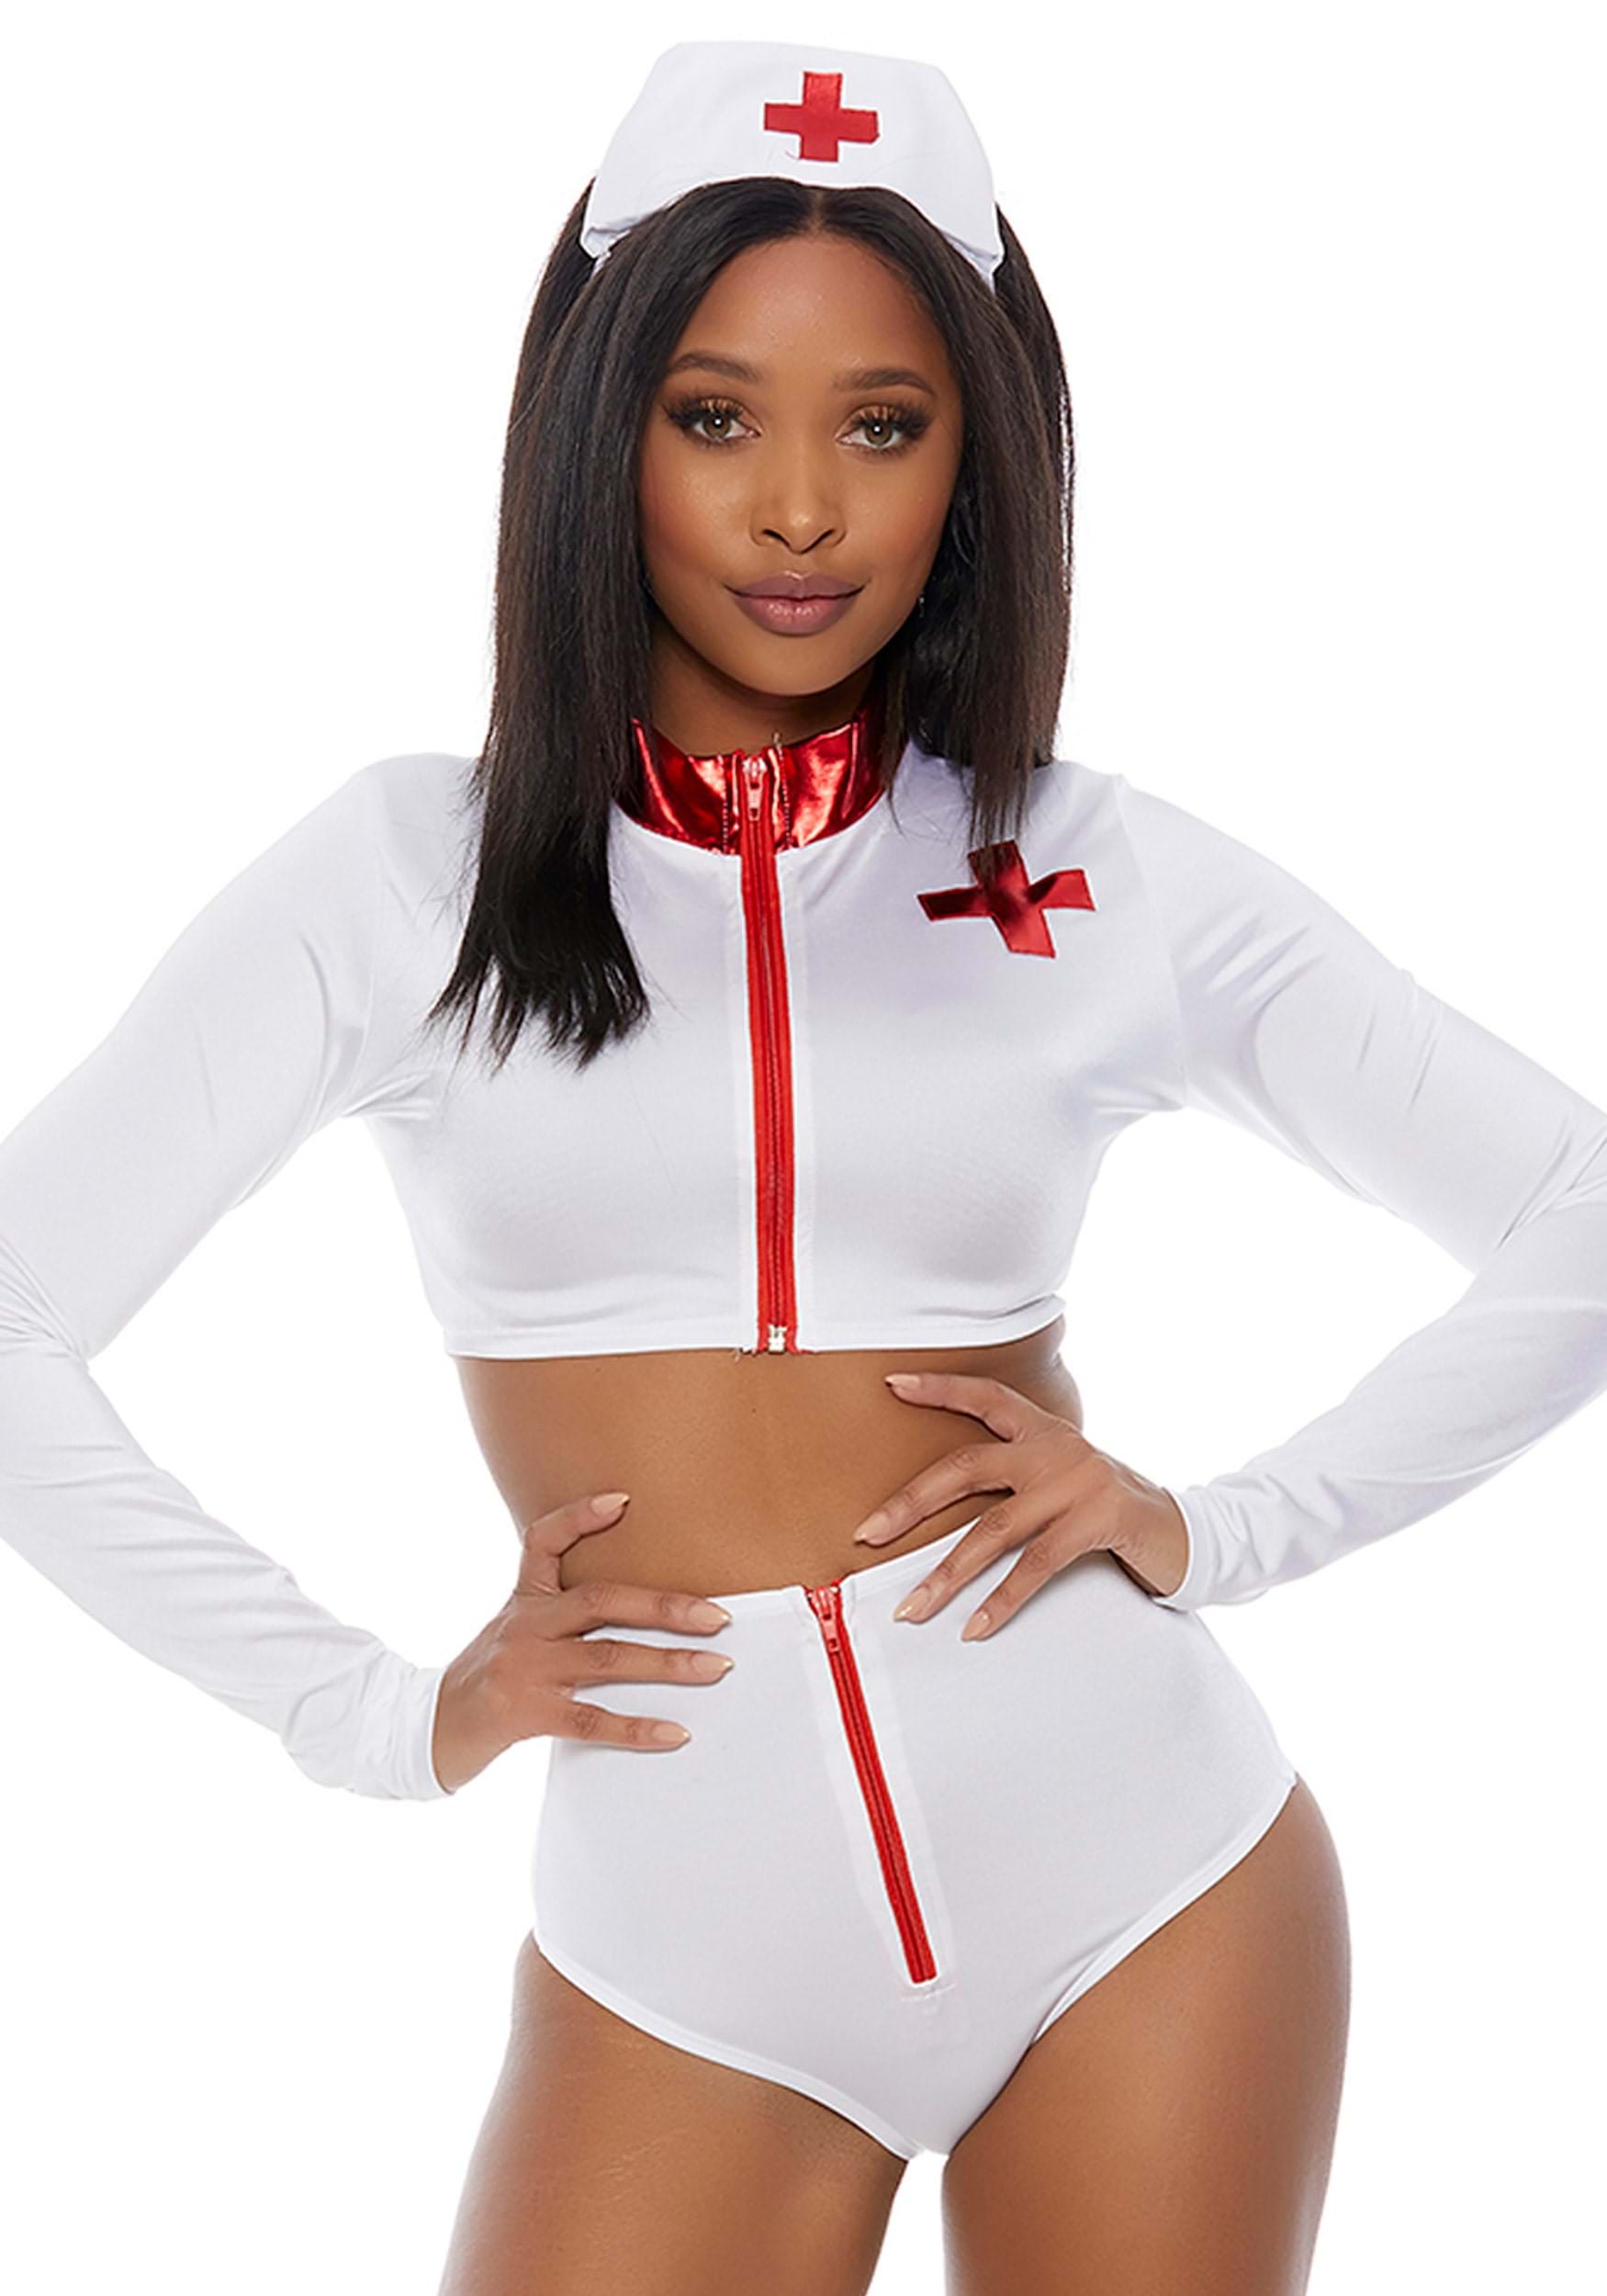 https://images.halloweencostumes.com/products/72160/1-1/womens-rescue-me-nurse-costume.jpg